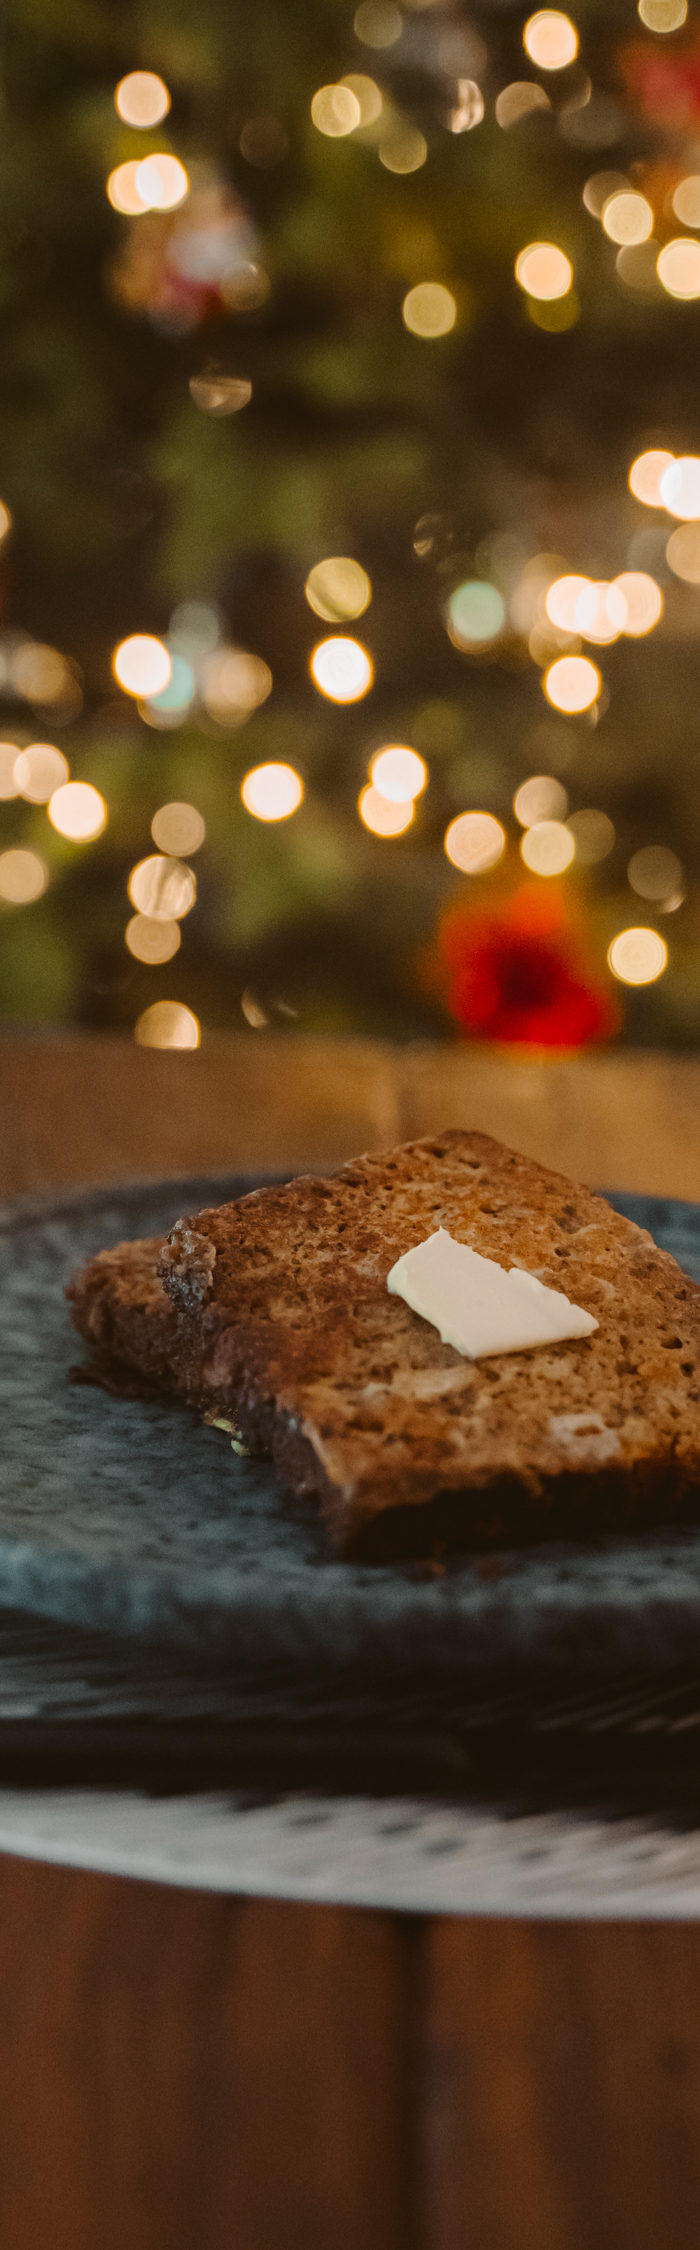 Miss USA 2011 Alyssa Campanella of The A List blog shares her banana bread french toast recipe